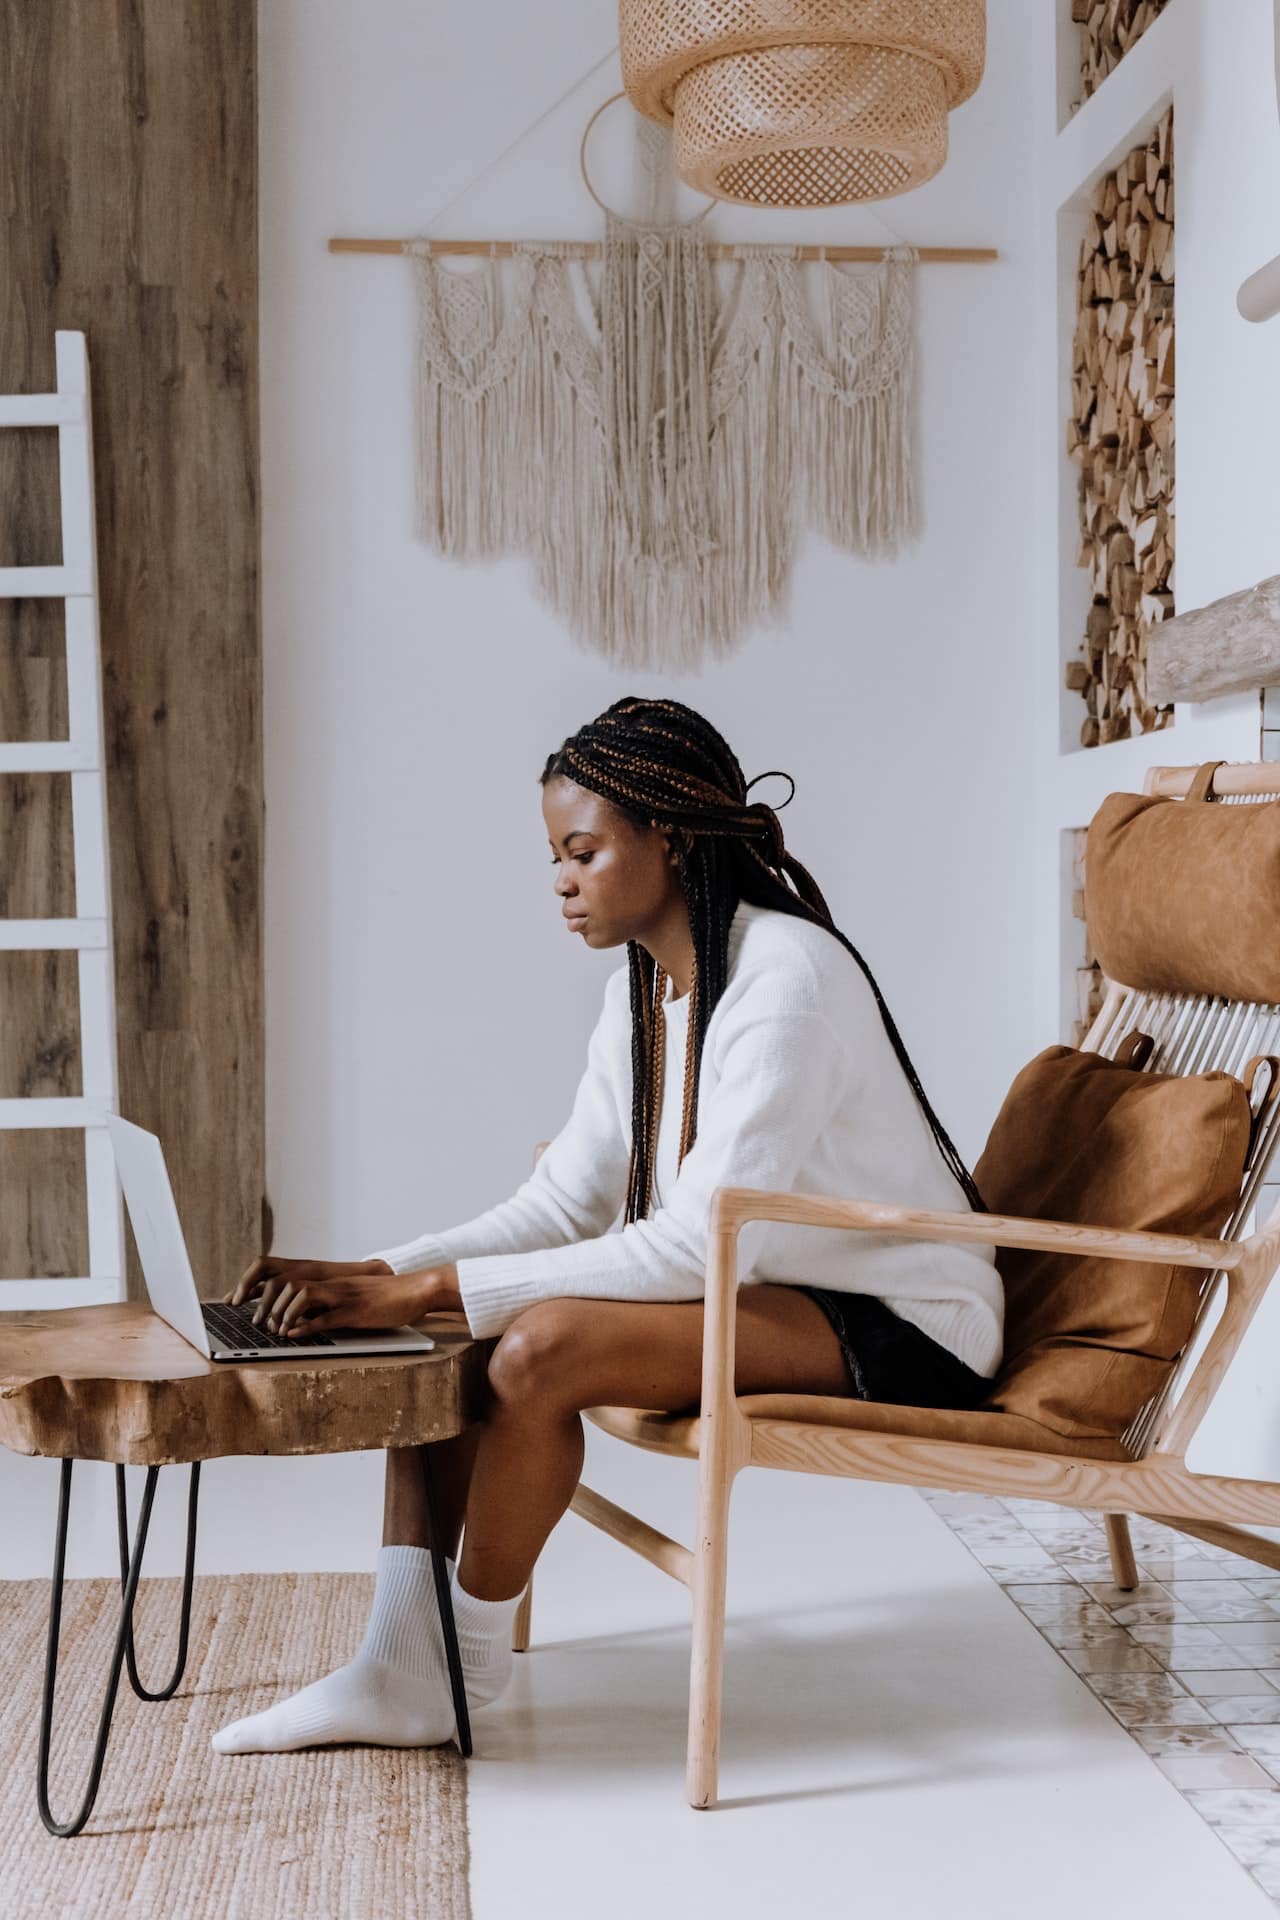 A Black femme presenting person sits at their laptop, apparently attending an online therapy session from home in a tastefully furnished living room. They have long braids and are wearing a white sweater, shorts and socks.n 